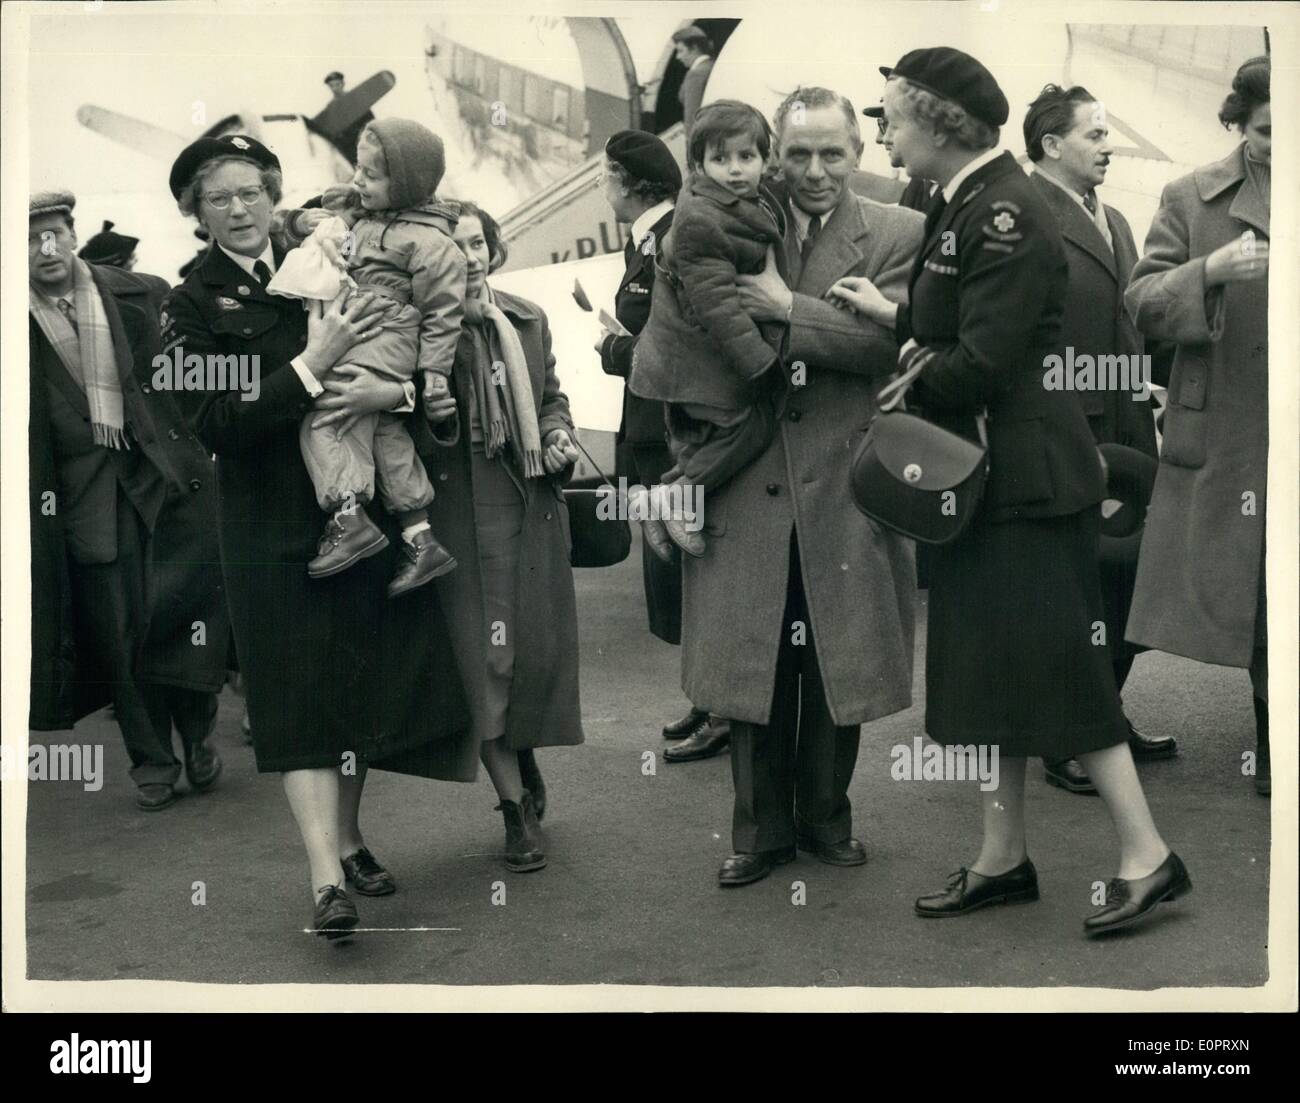 Nov. 11, 1956 - Hungarian Refugeees arrive in England, escorted by Social Workers; A party of 61 Hungarian Refugees arrived at Blackbushe Airport this morning. They are the advance guard of the 2,500 that this country is taking. Photo Shows Refugees including children are escorted by Social workers on arrival at Blackbushe this afternoon. Stock Photo